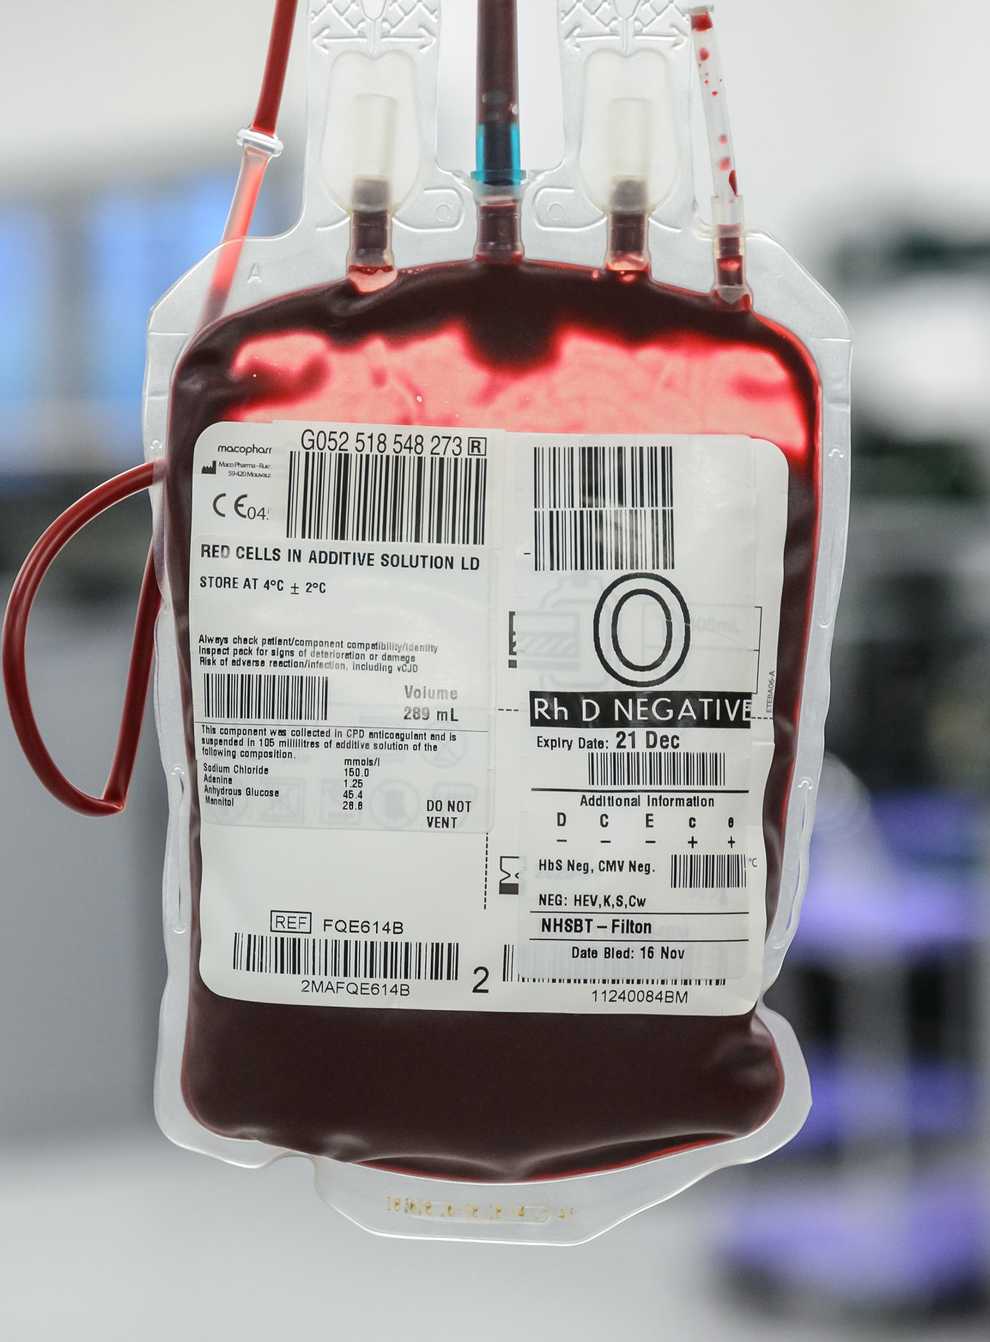 Those found to have O negative blood will be offered priority appointments (NHS Blood and Transplant/PA)